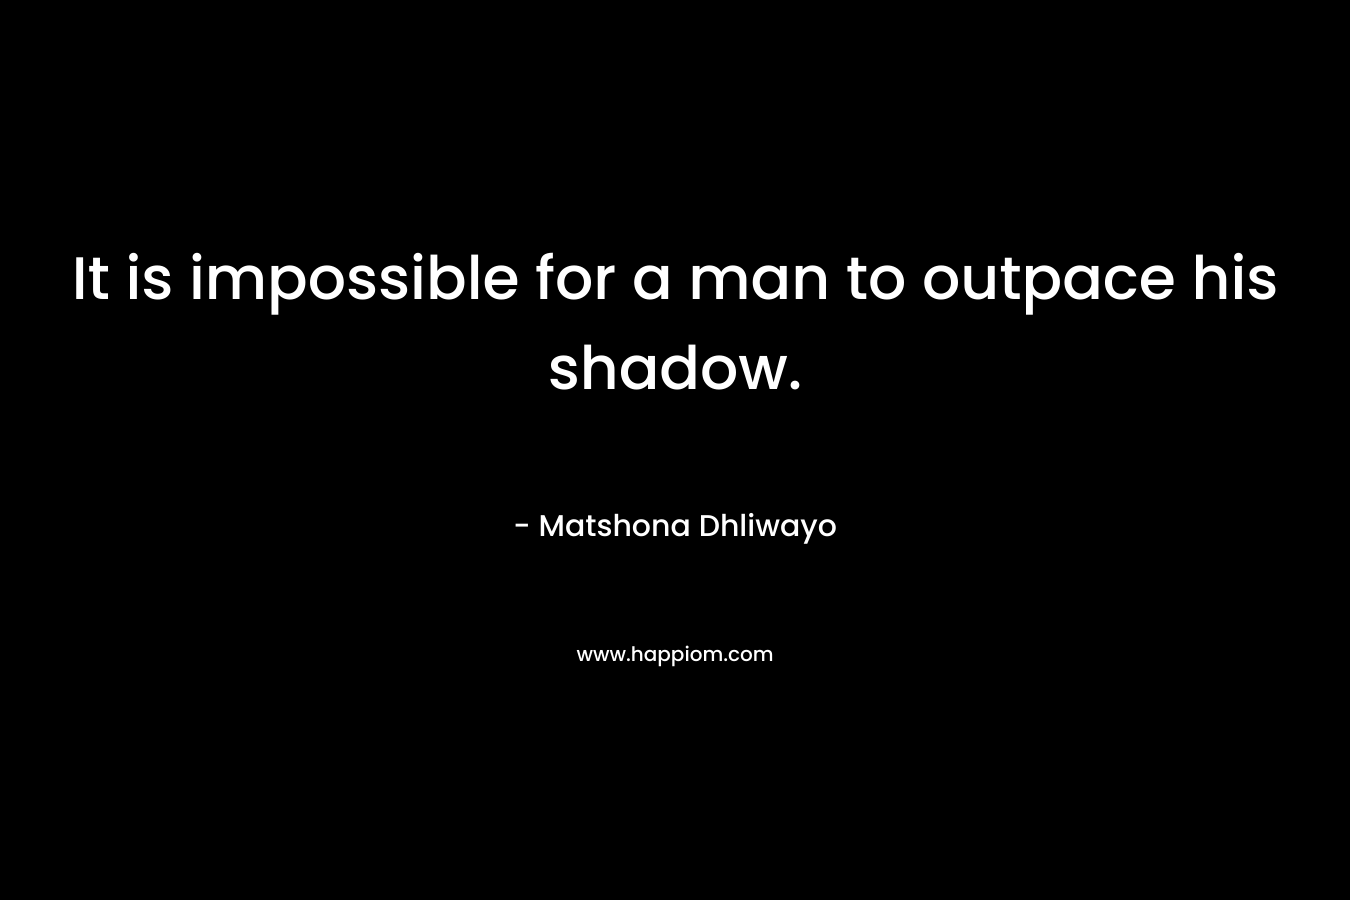 It is impossible for a man to outpace his shadow.